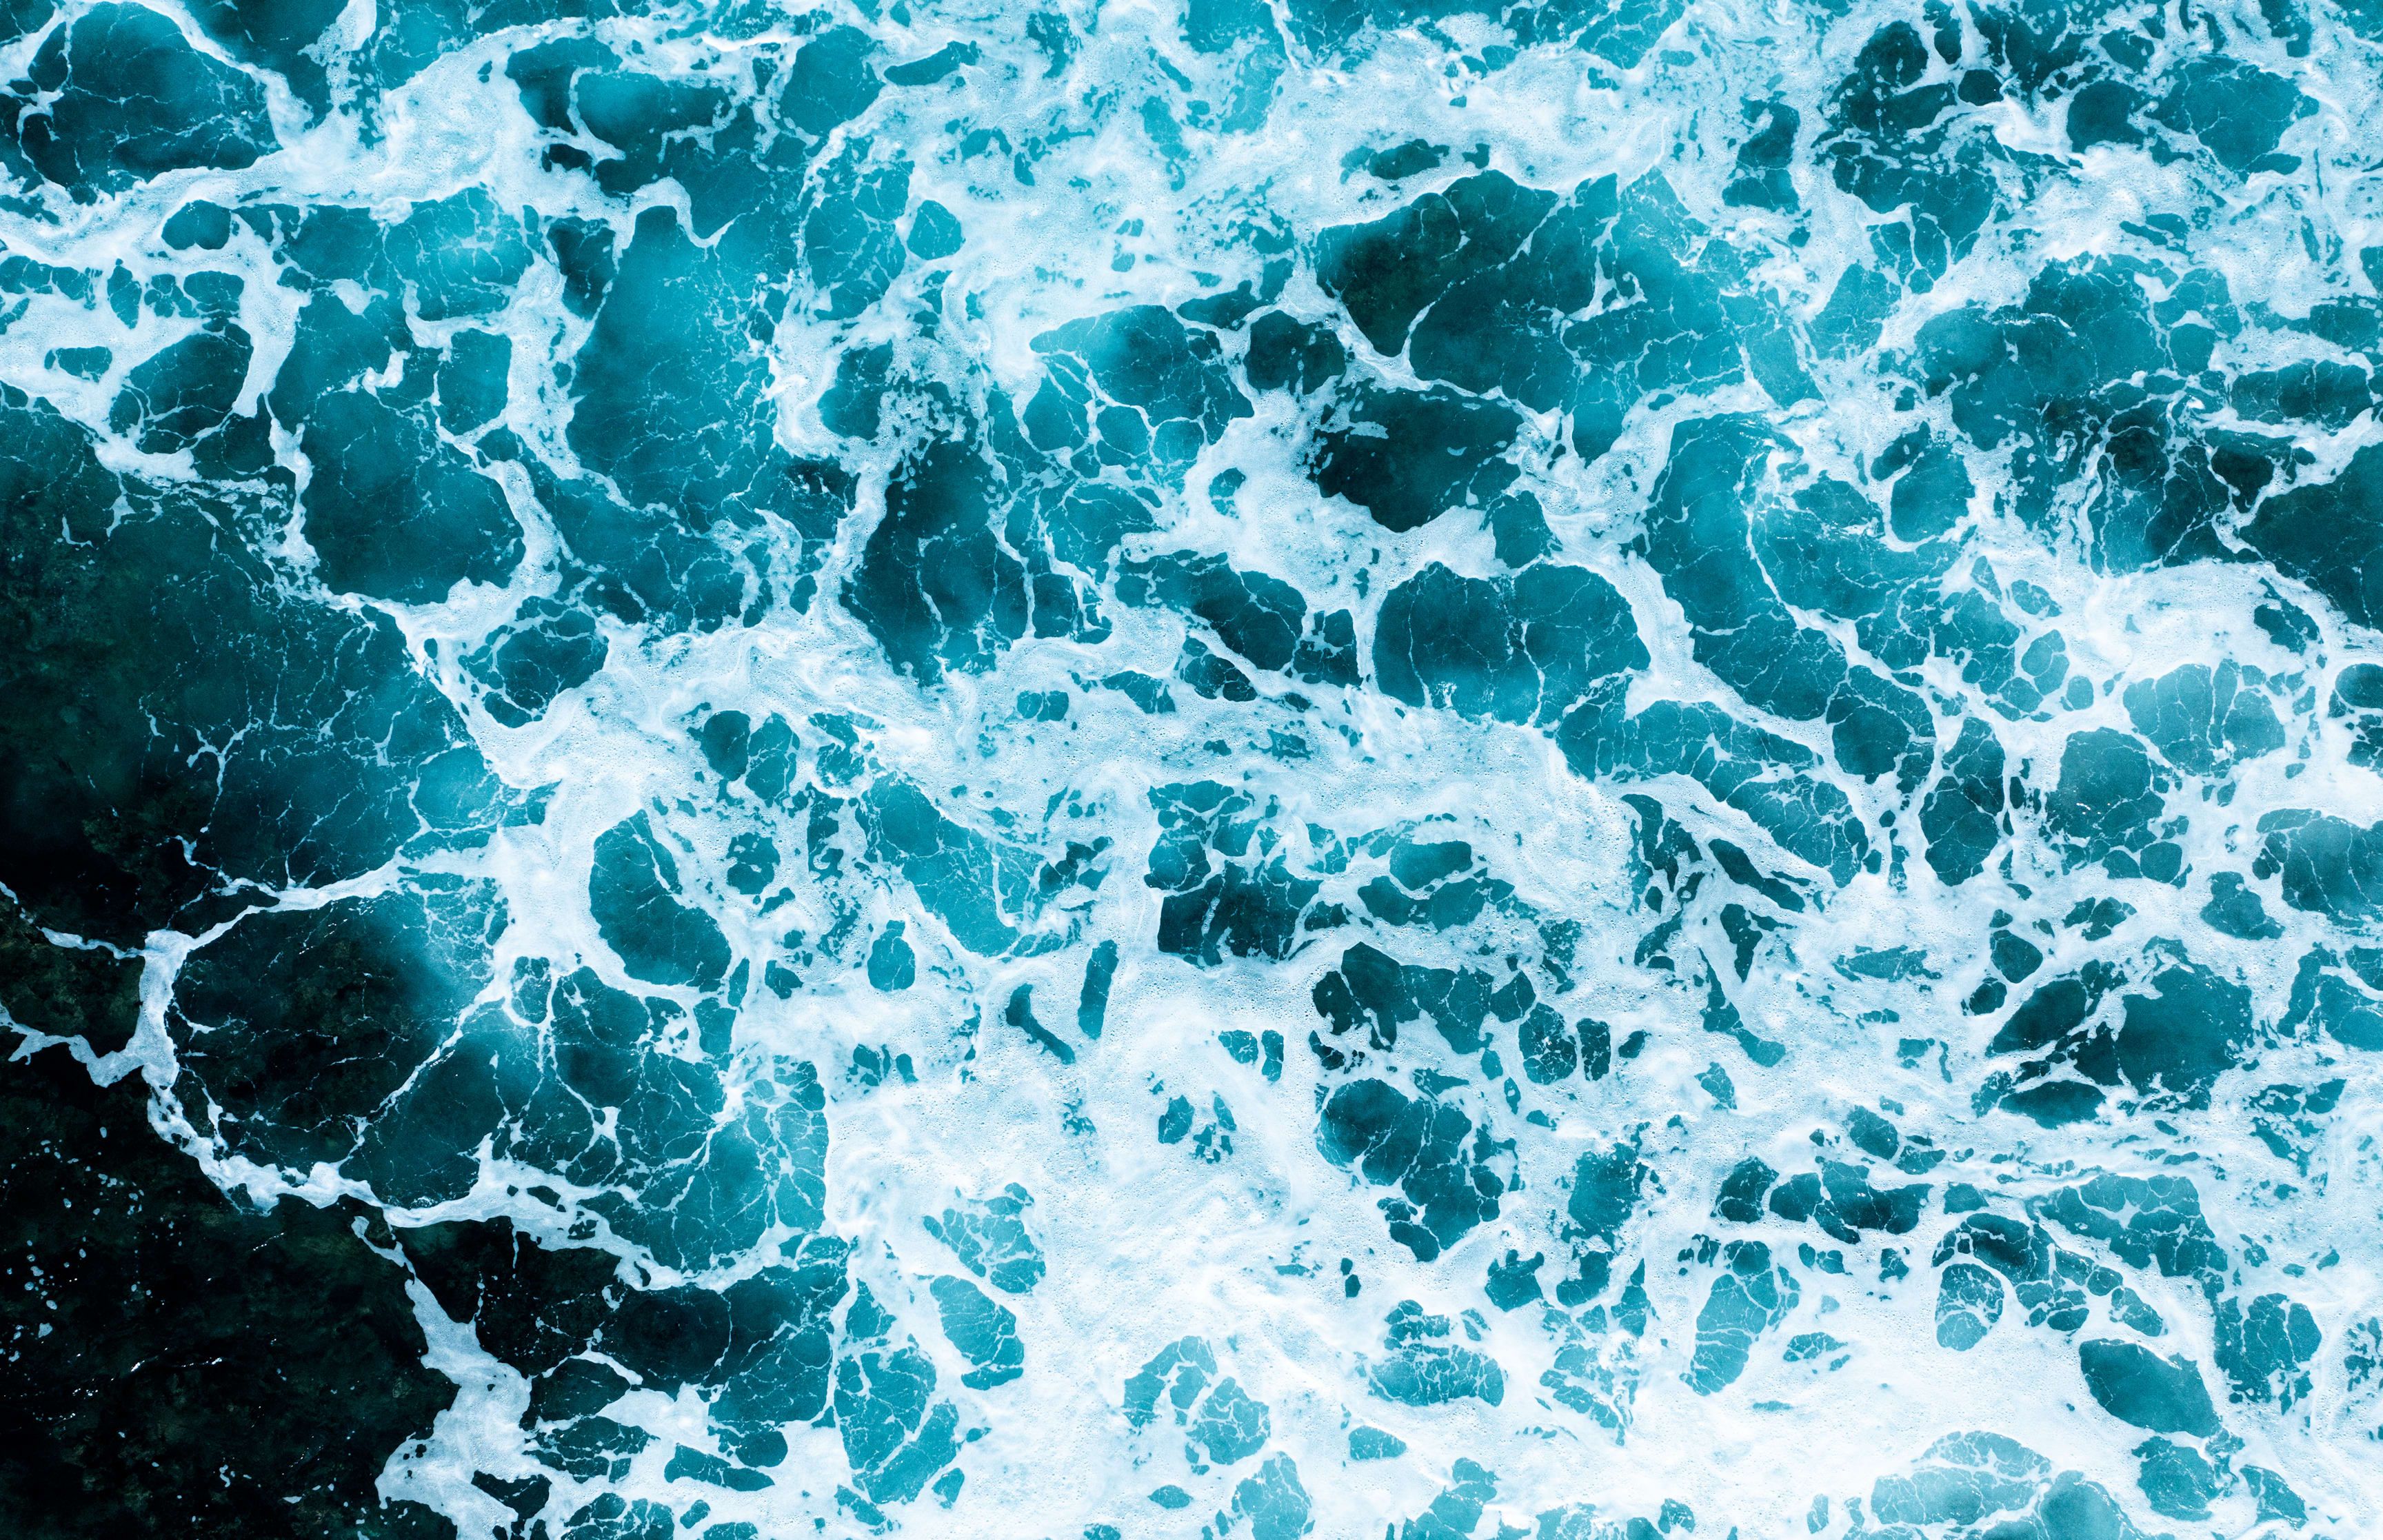 Aerial view of a rough sea - Surf